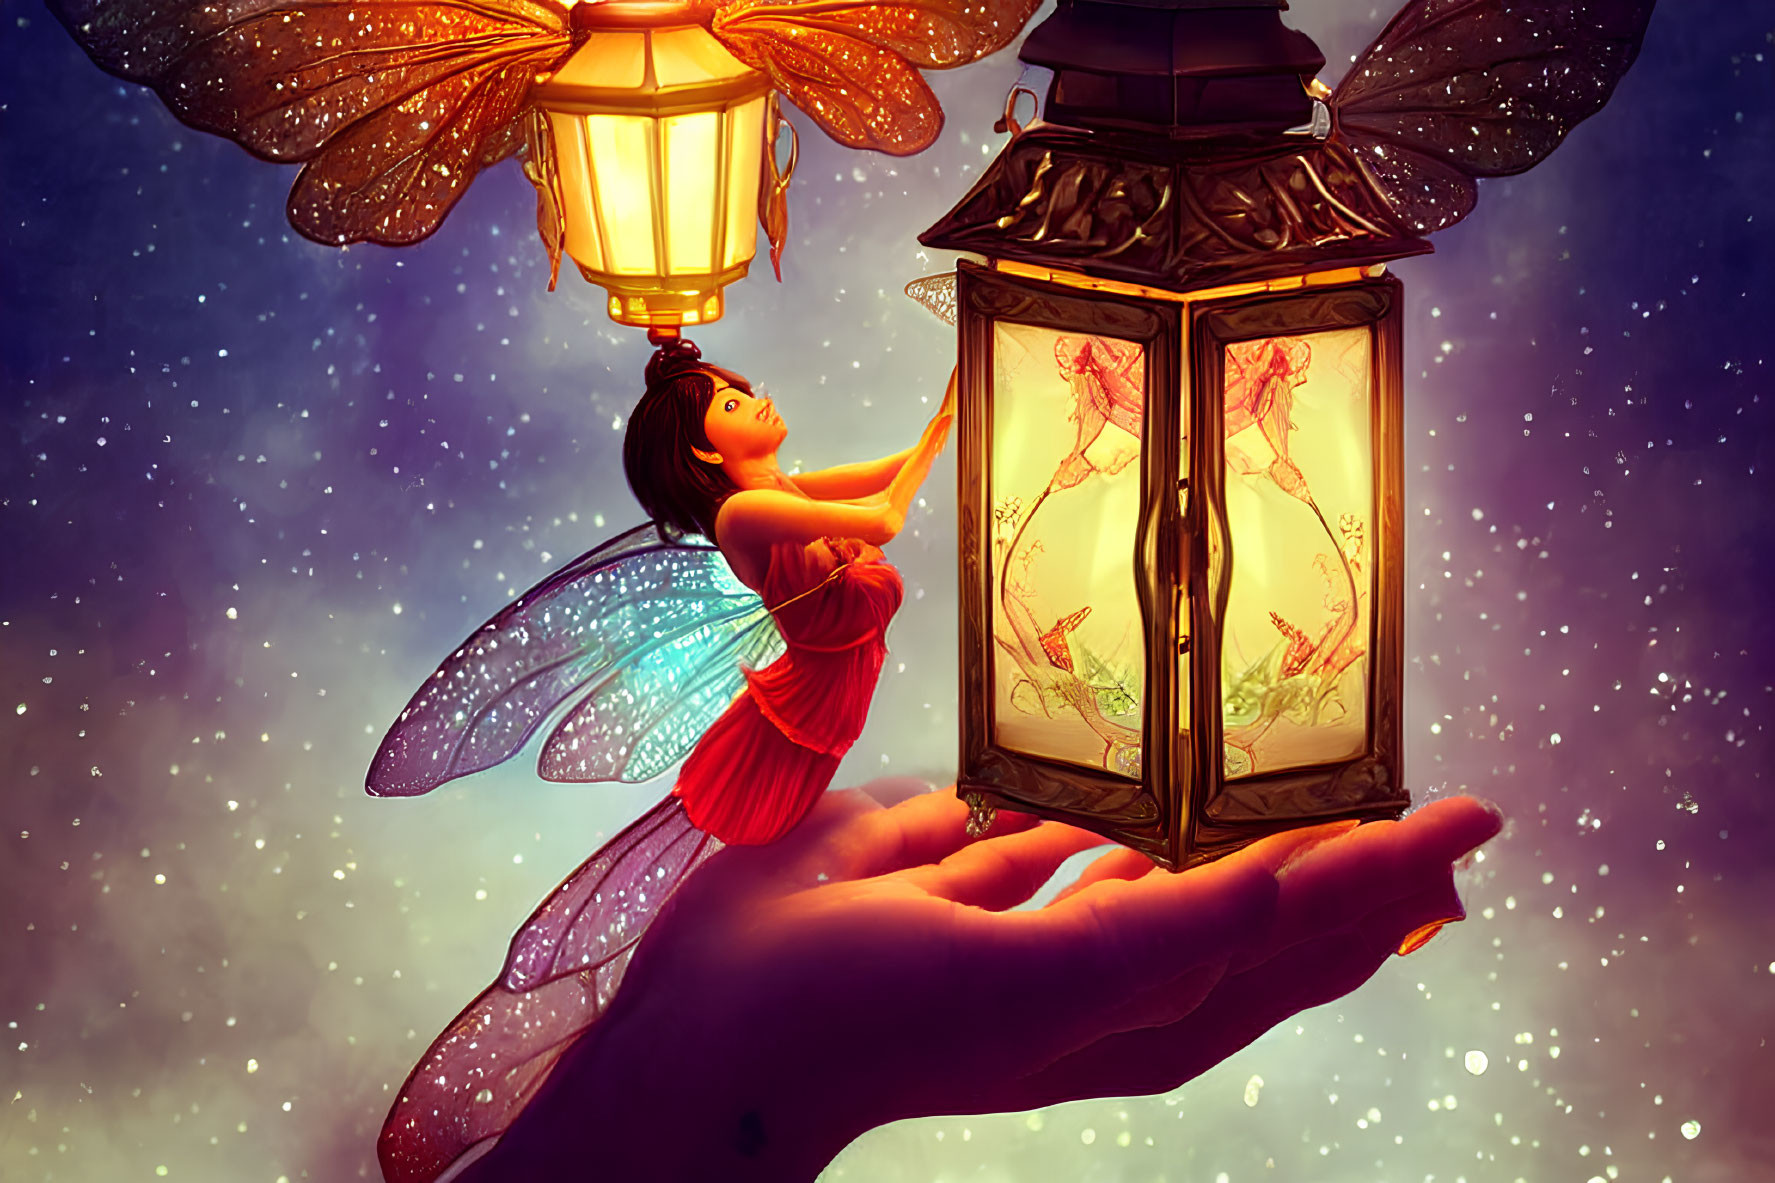 Miniature fairy in red dress opens lantern under starry sky imagery